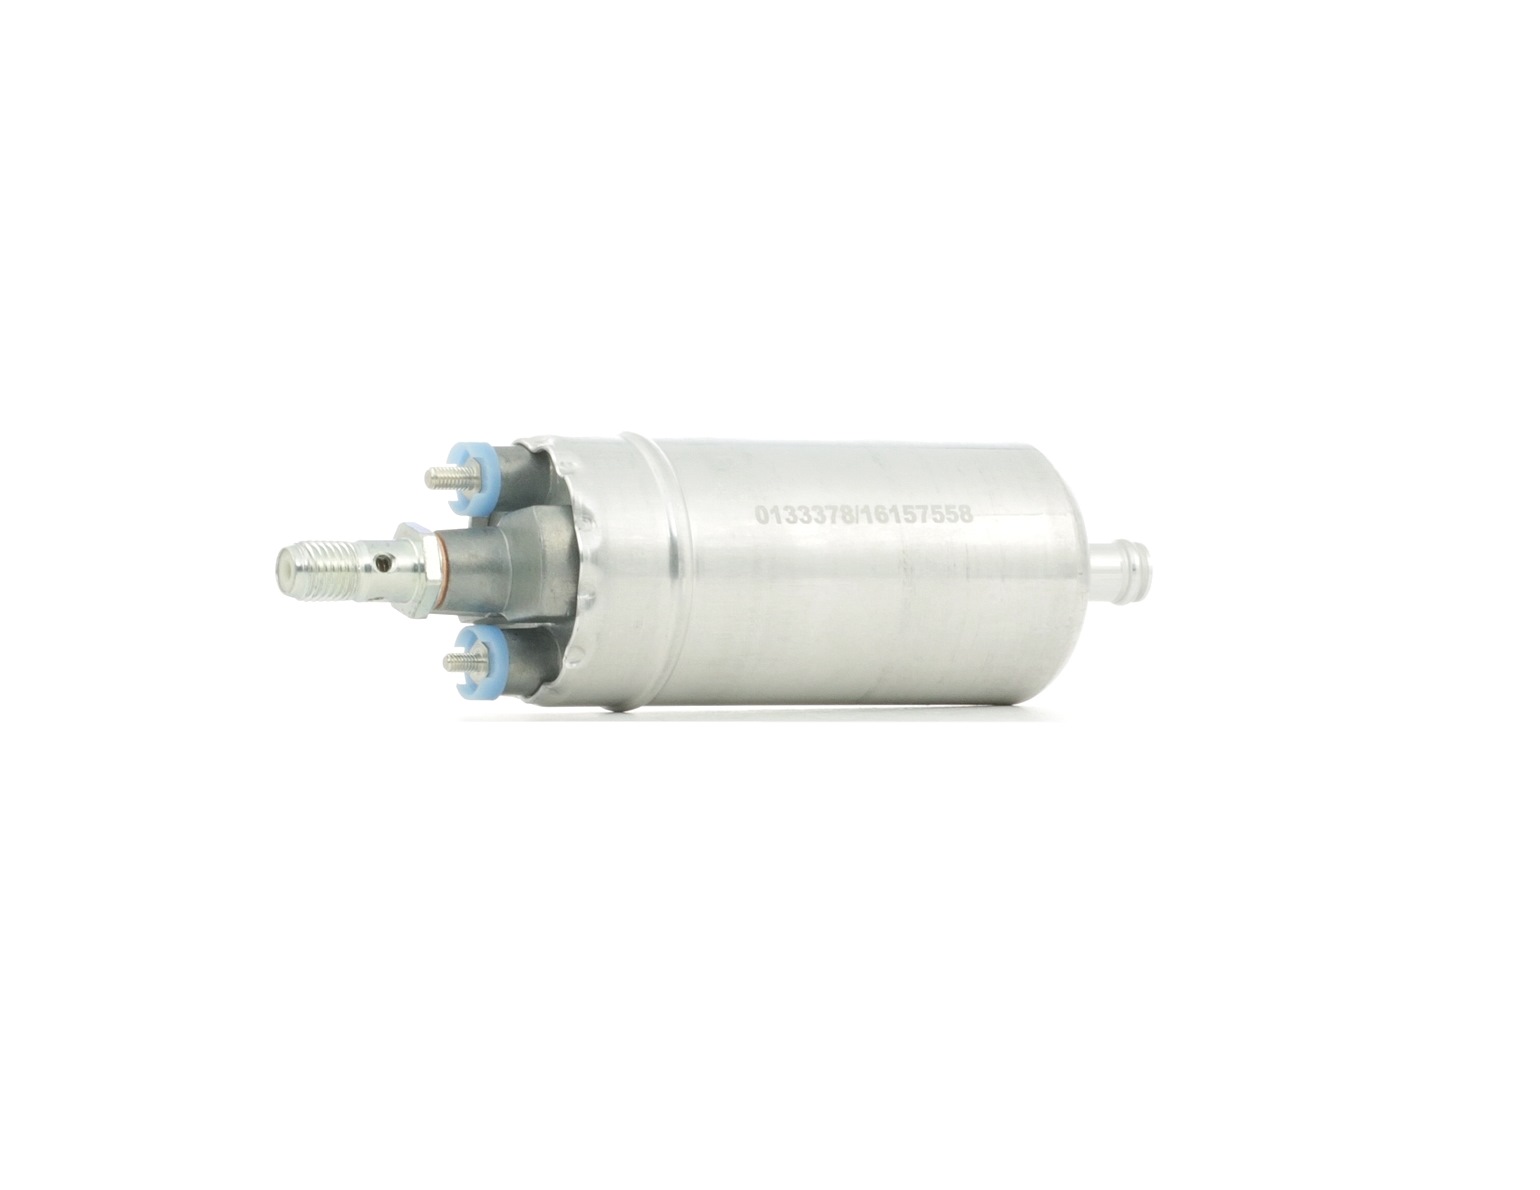 Fuel pump assembly STARK Electric - SKFP-0160283